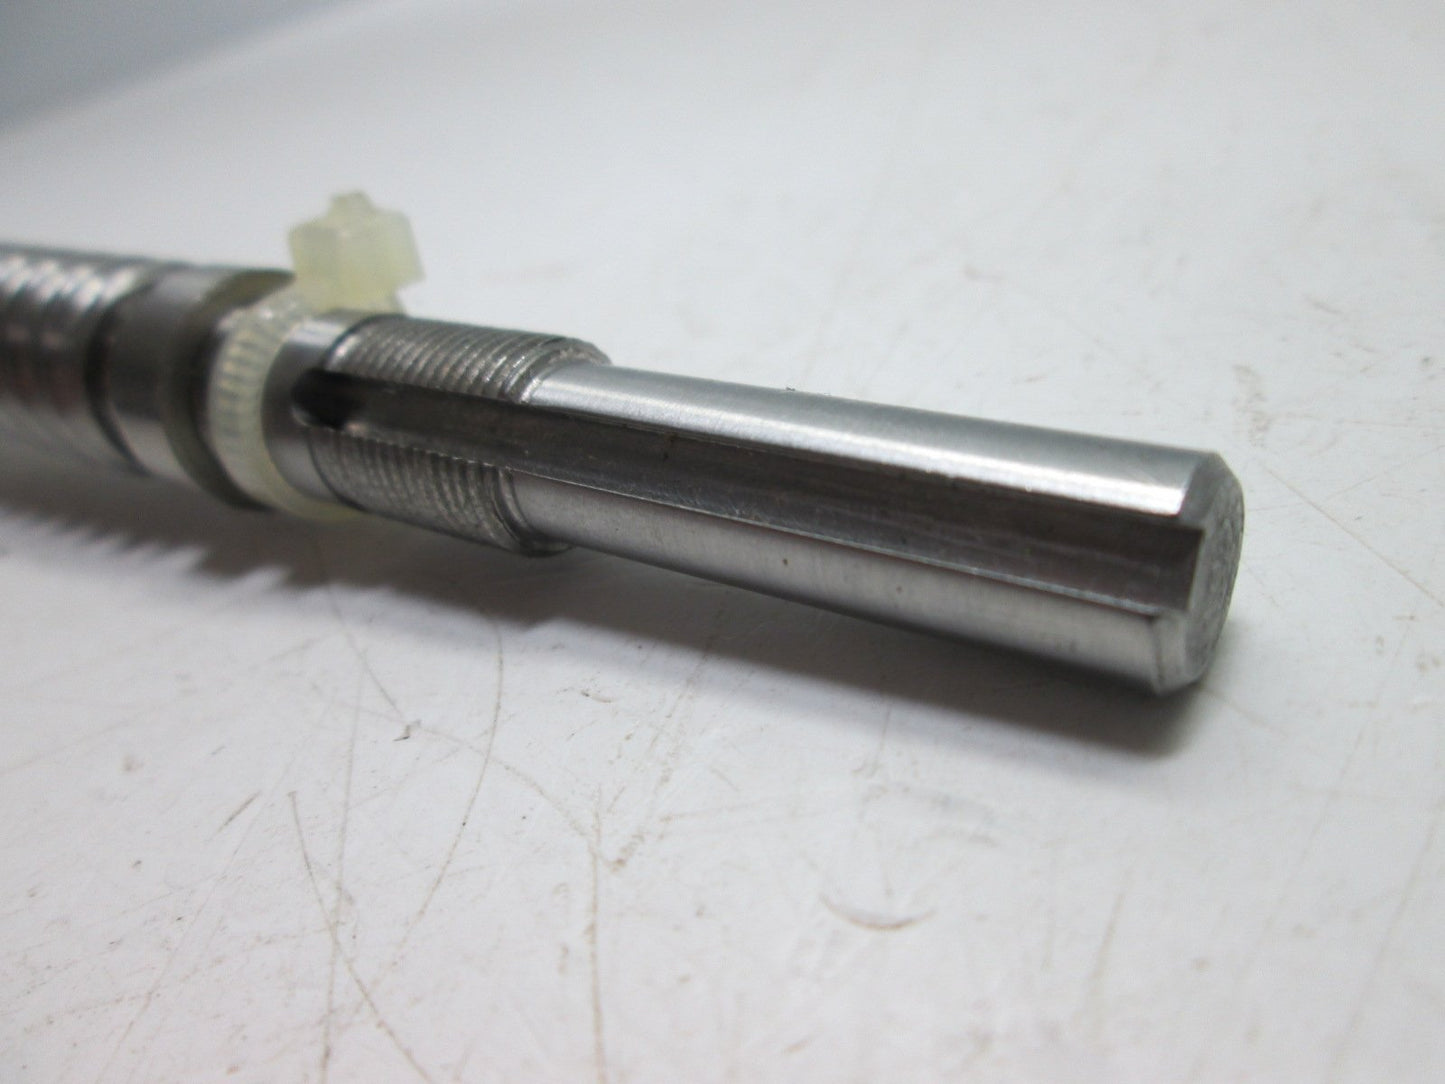 Used Ball Screw (PRB30-10.22), Overall Length: 10.22", Ball Screw: 0.615" ? x 7-1/8"